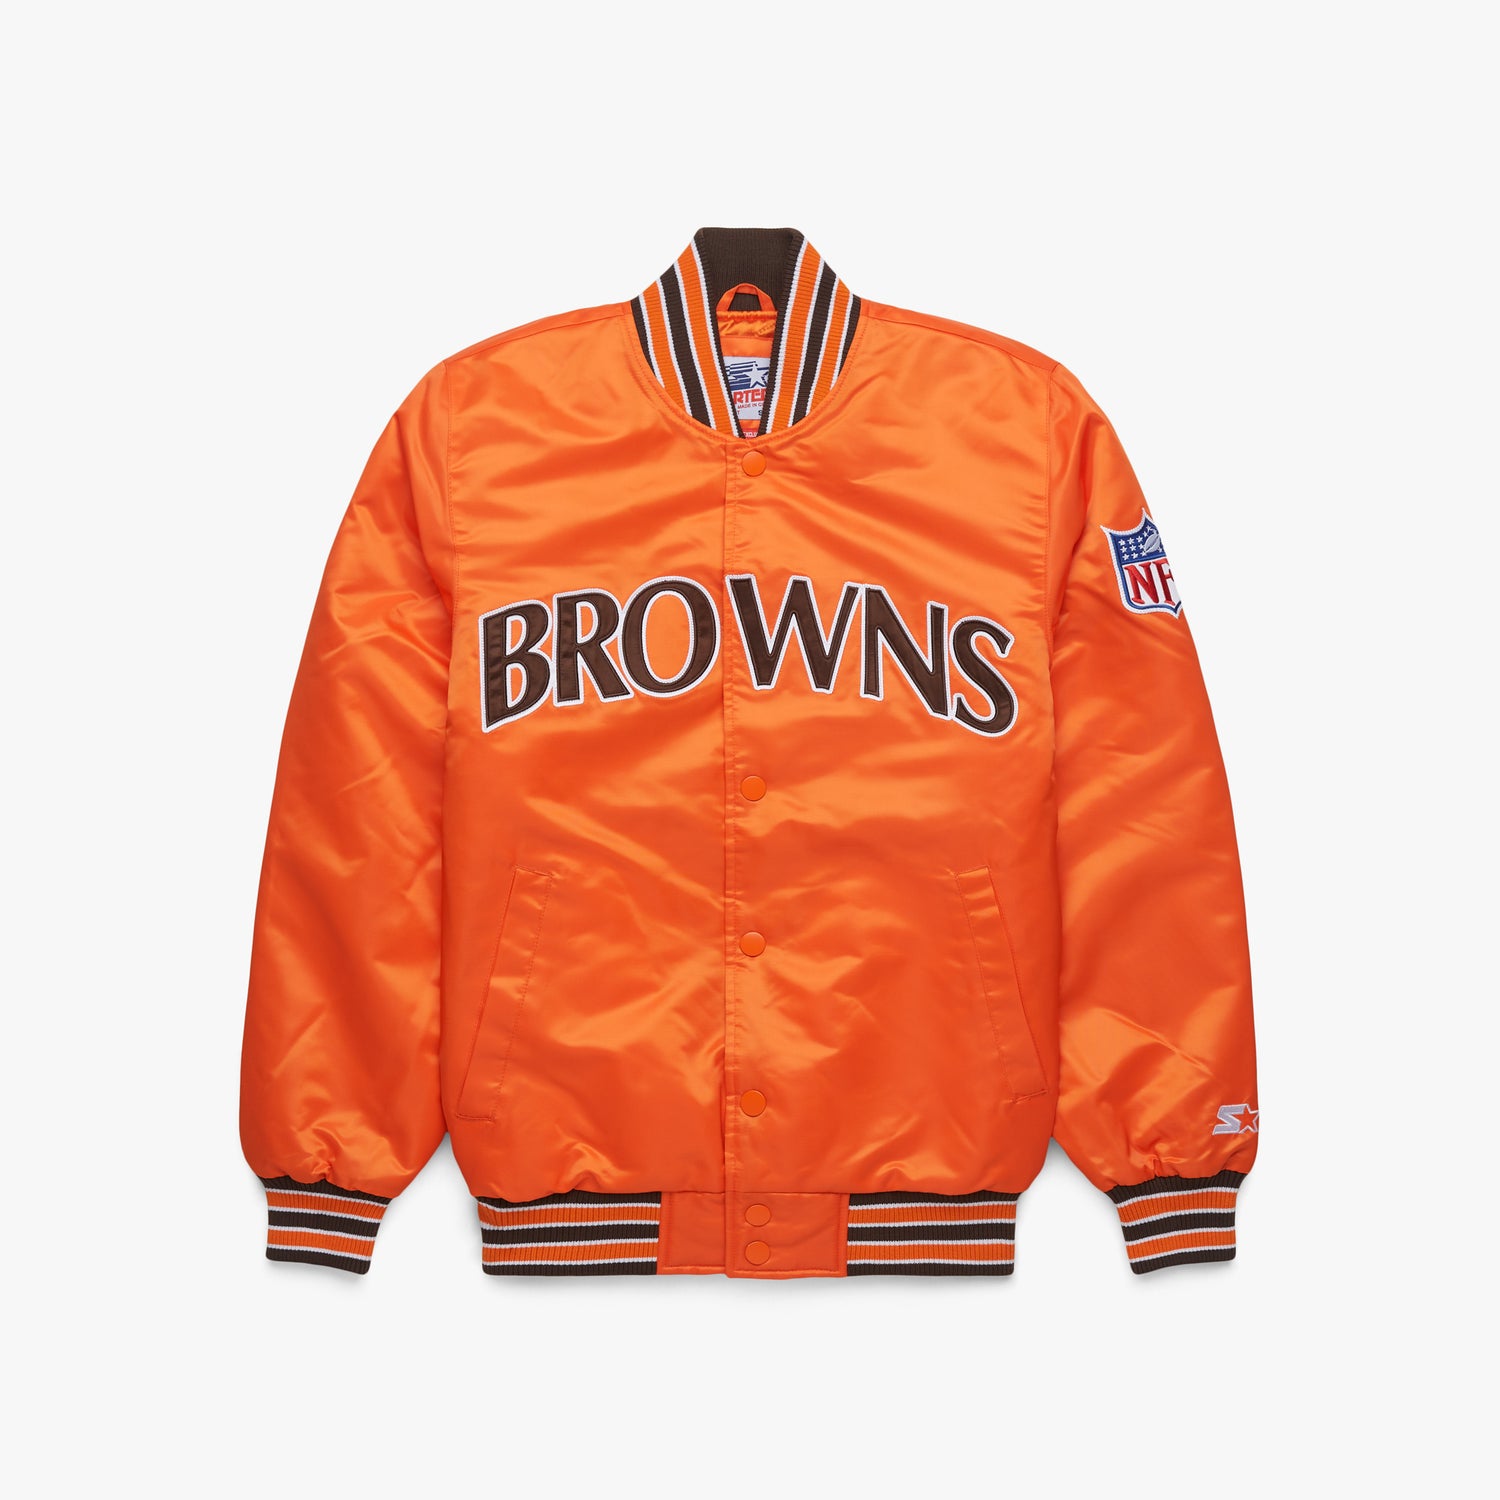 Vintage Cleveland Browns starter jackets - clothing & accessories